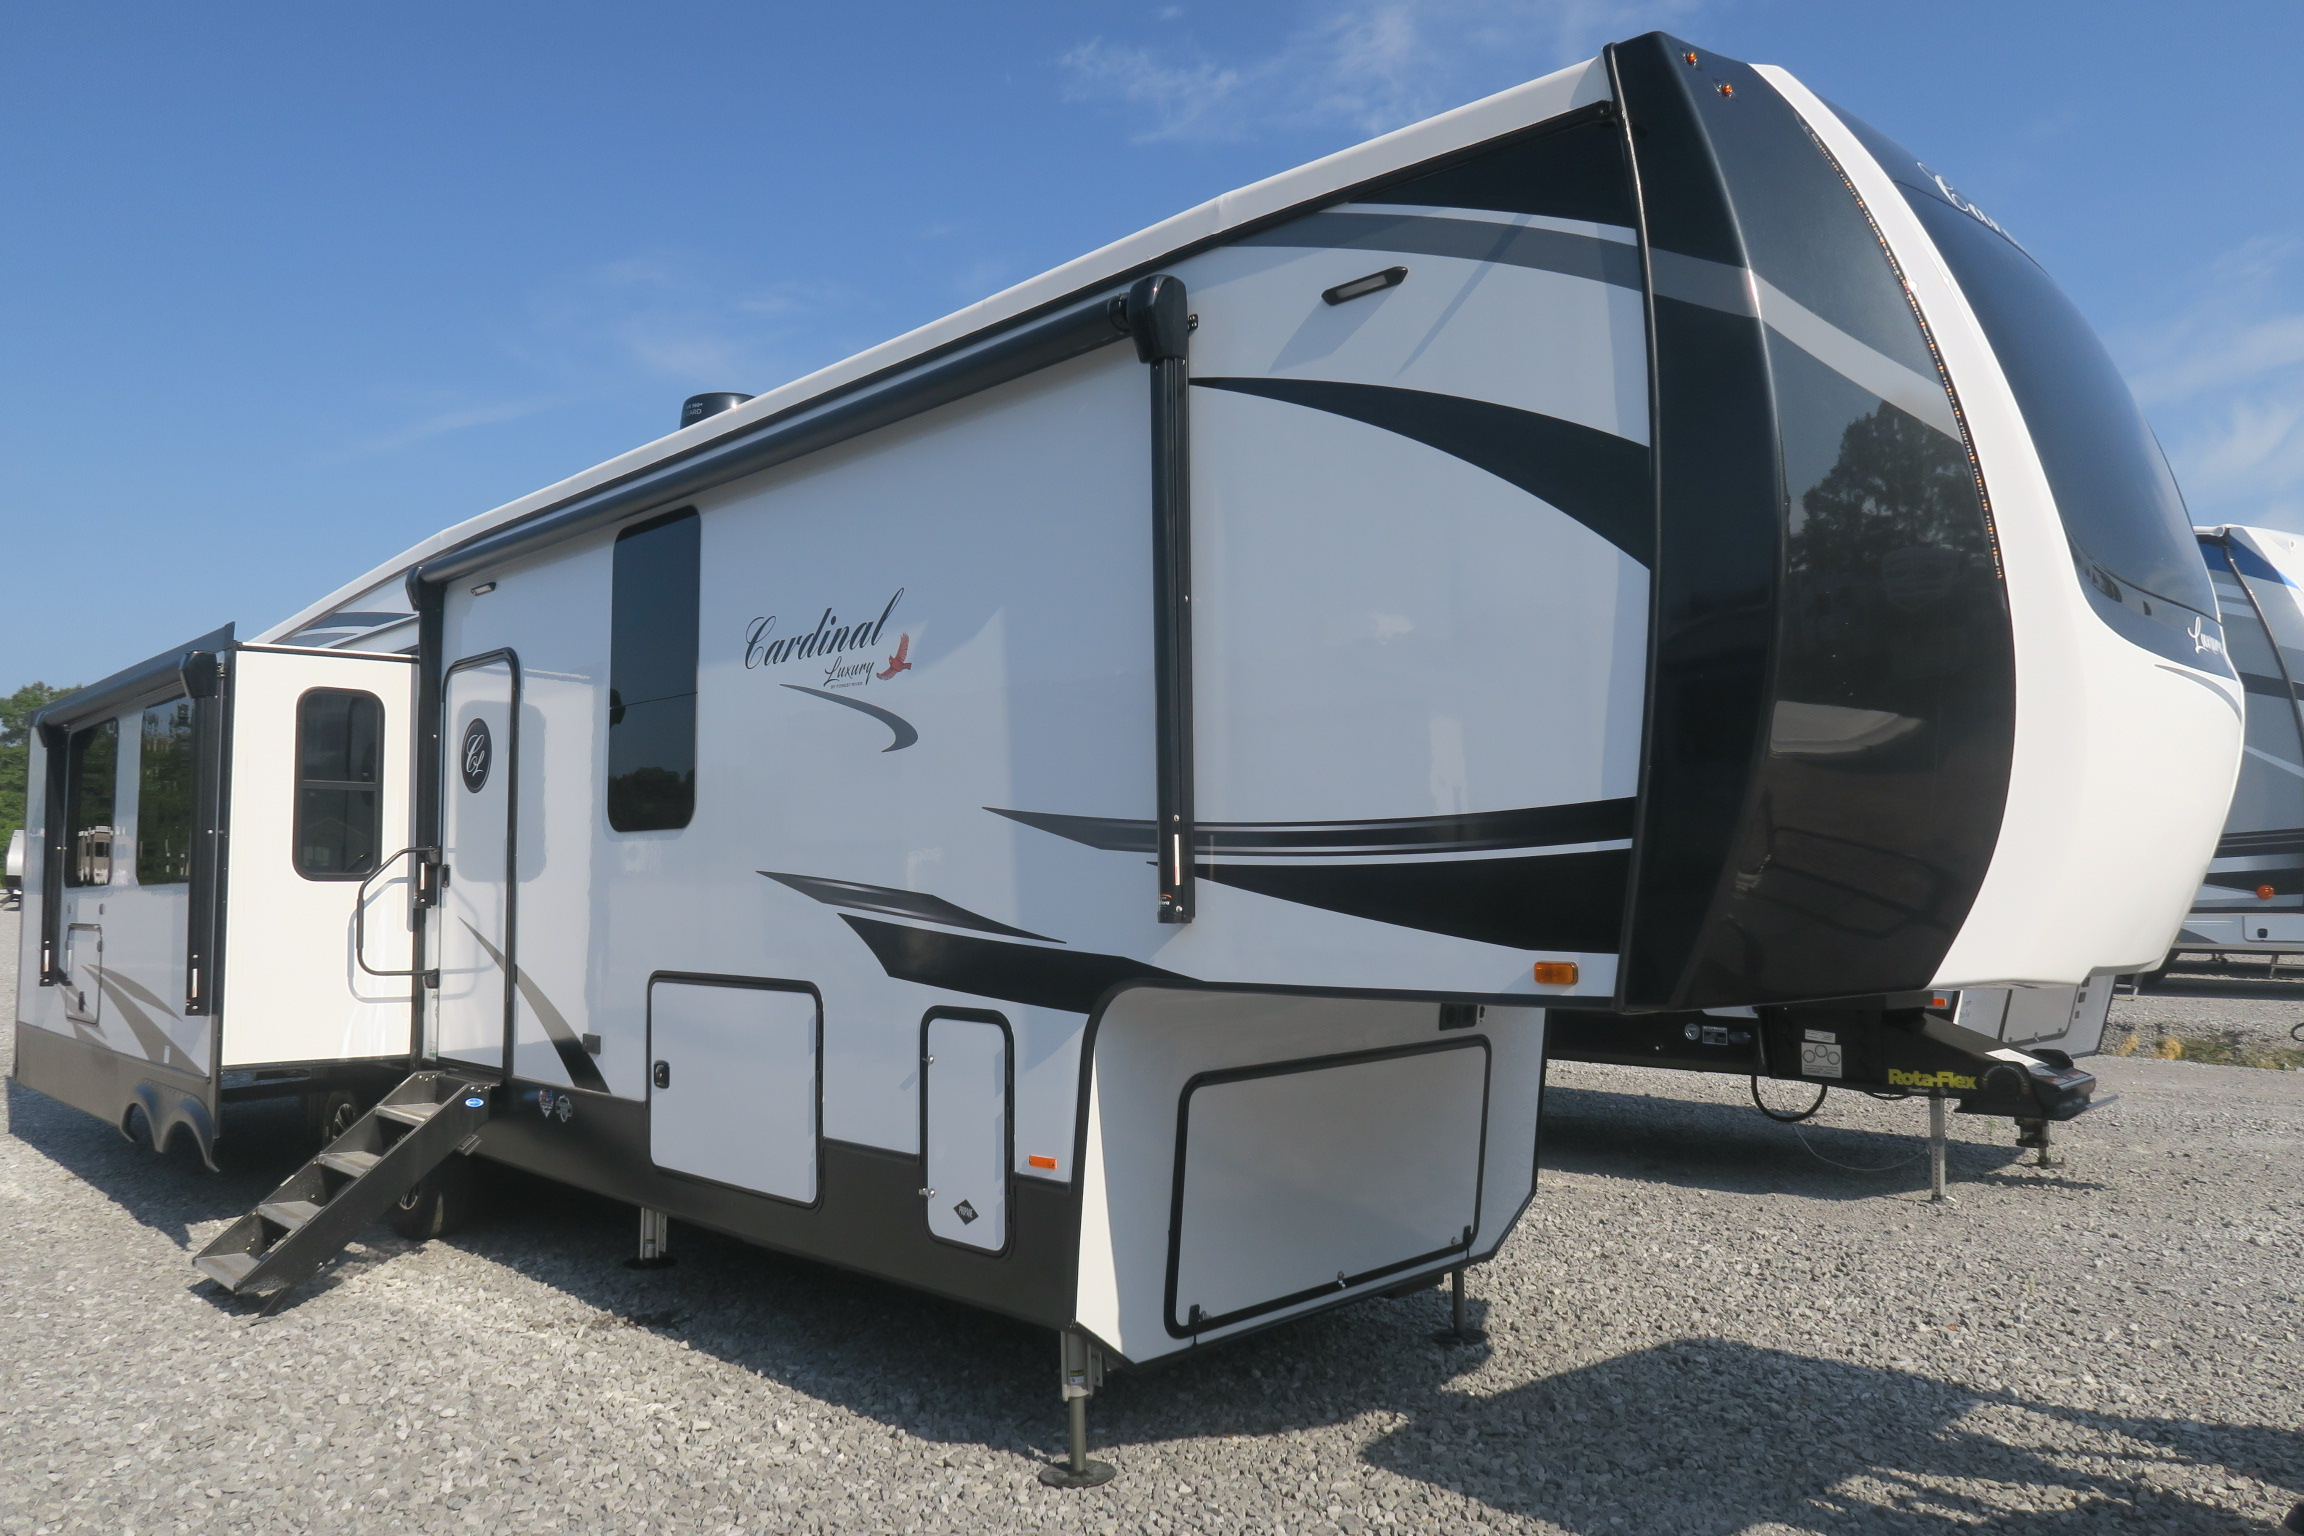 NEW 2021 CARDINAL LUXURY 390FBX Overview Berryland Campers